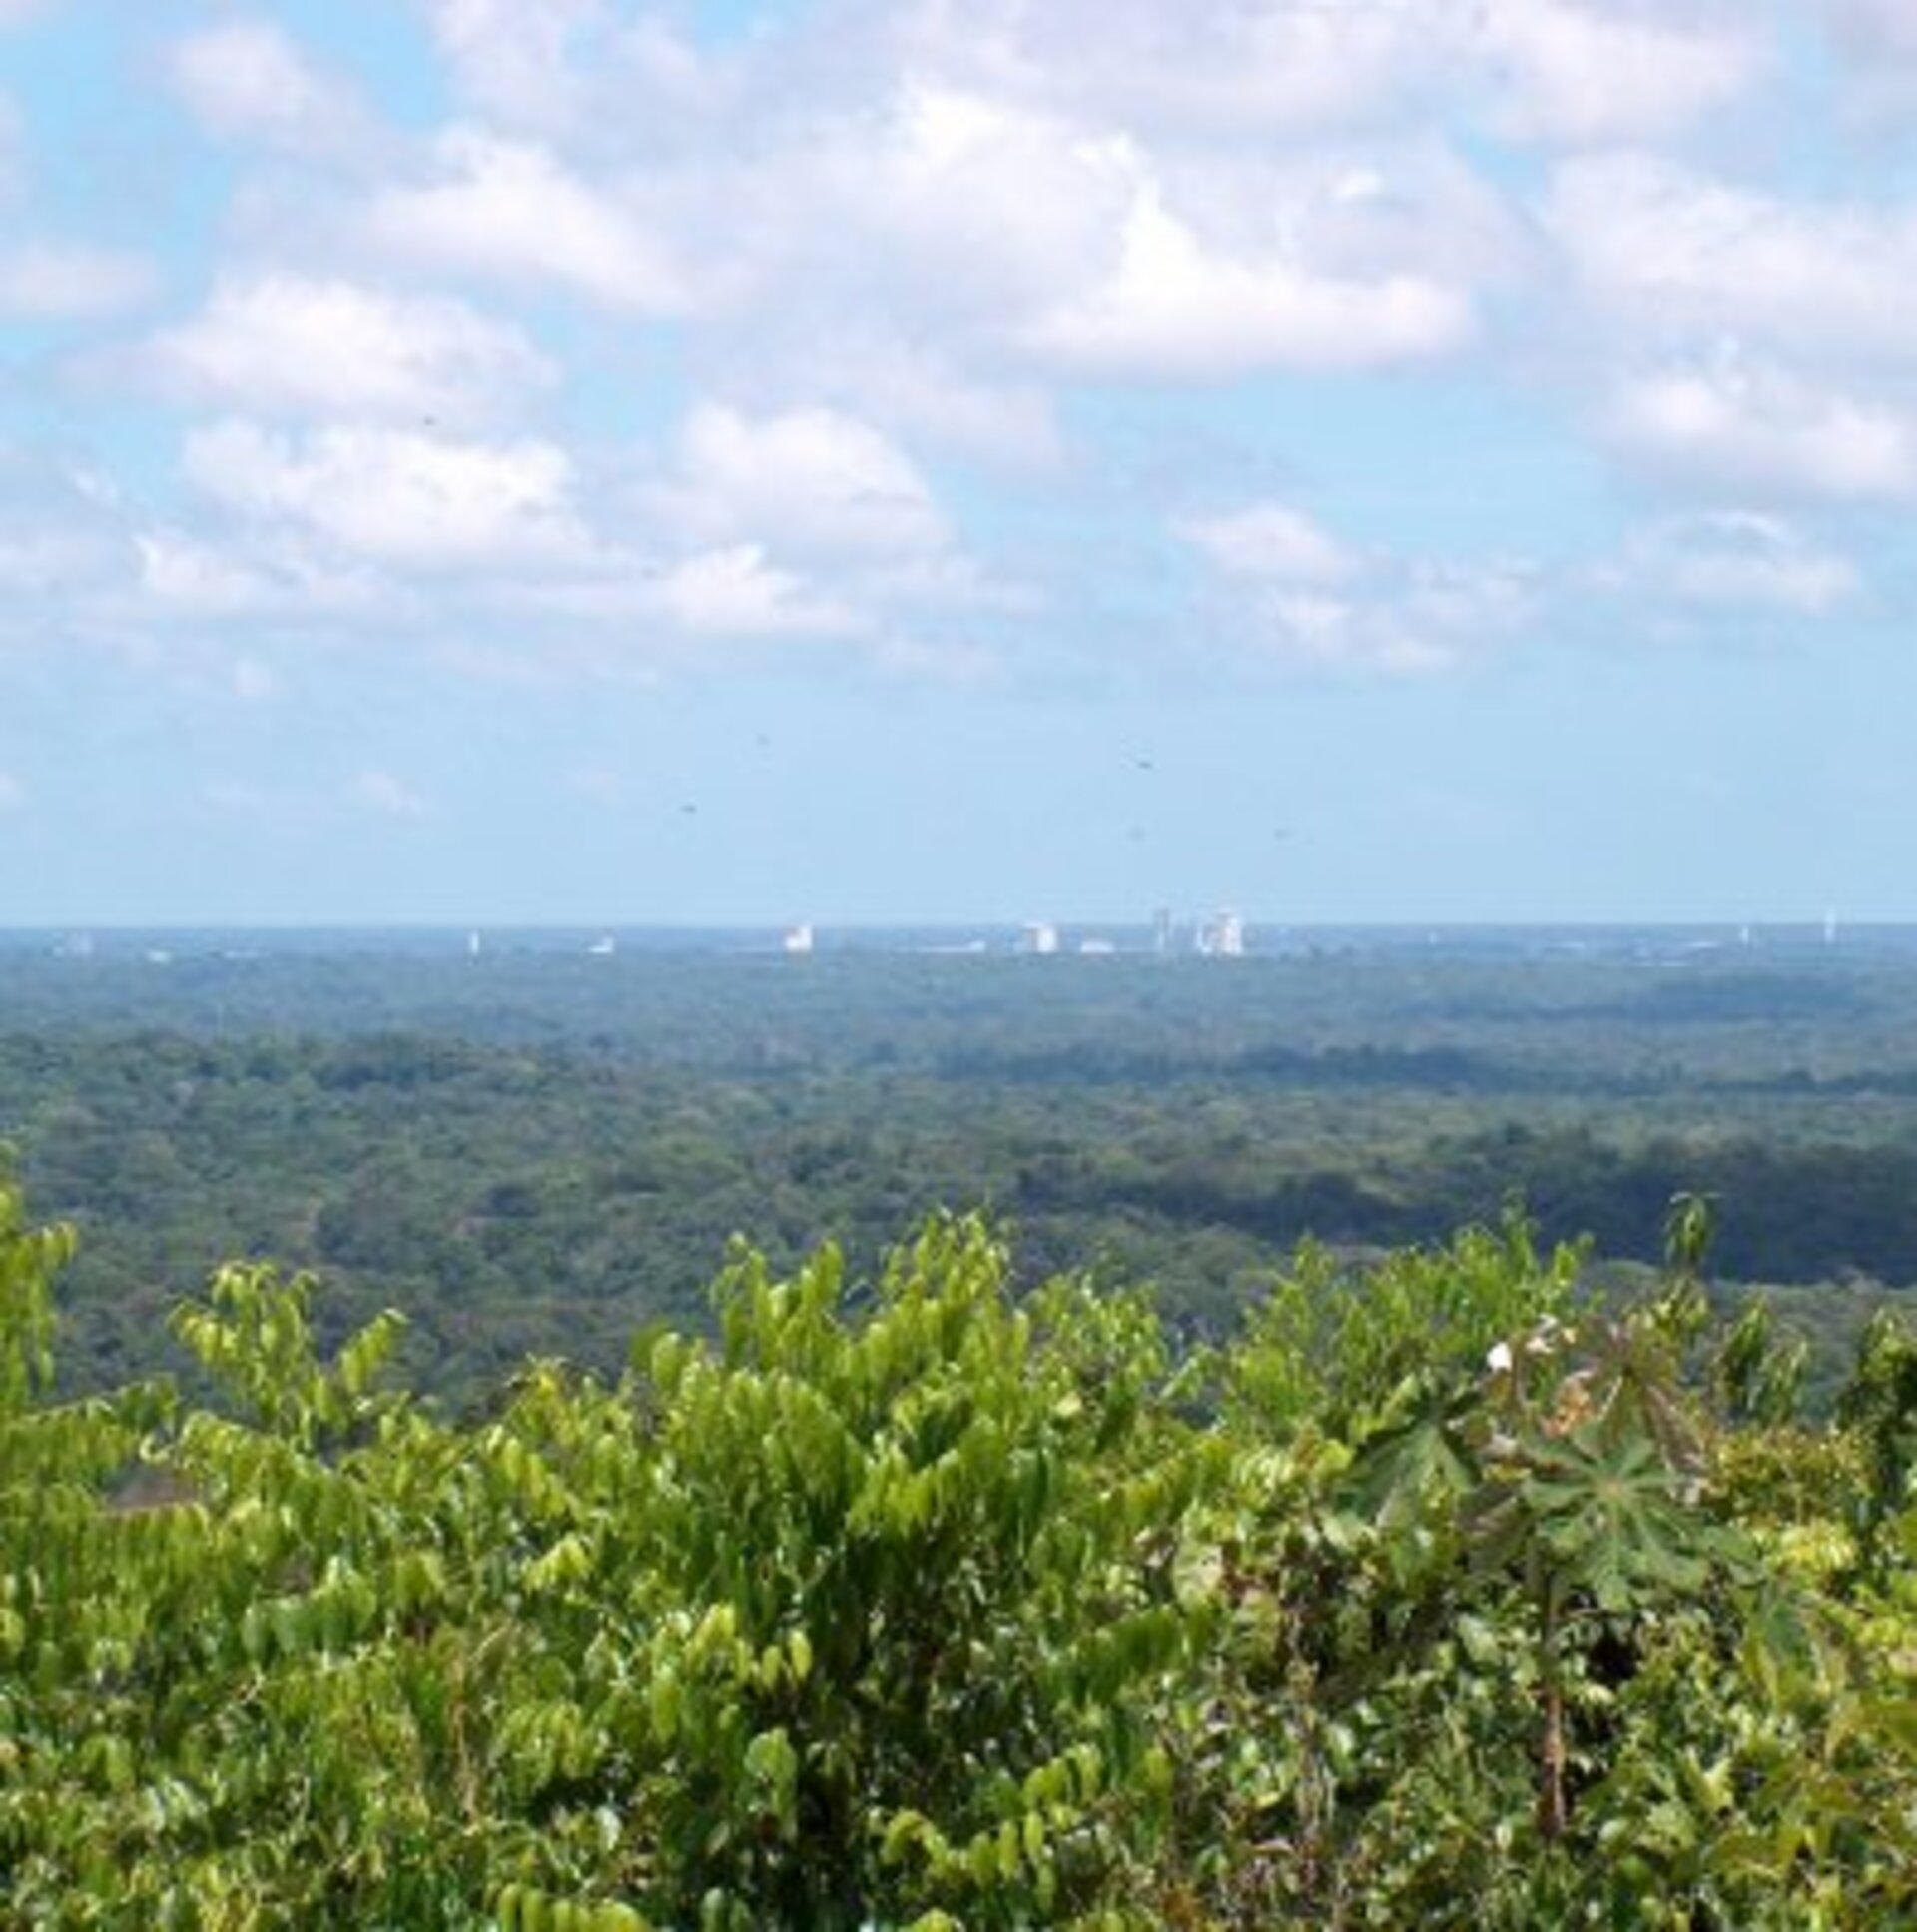 The Ariane 4 and 5 (right) launch complexes as seen from the Mont des Singes